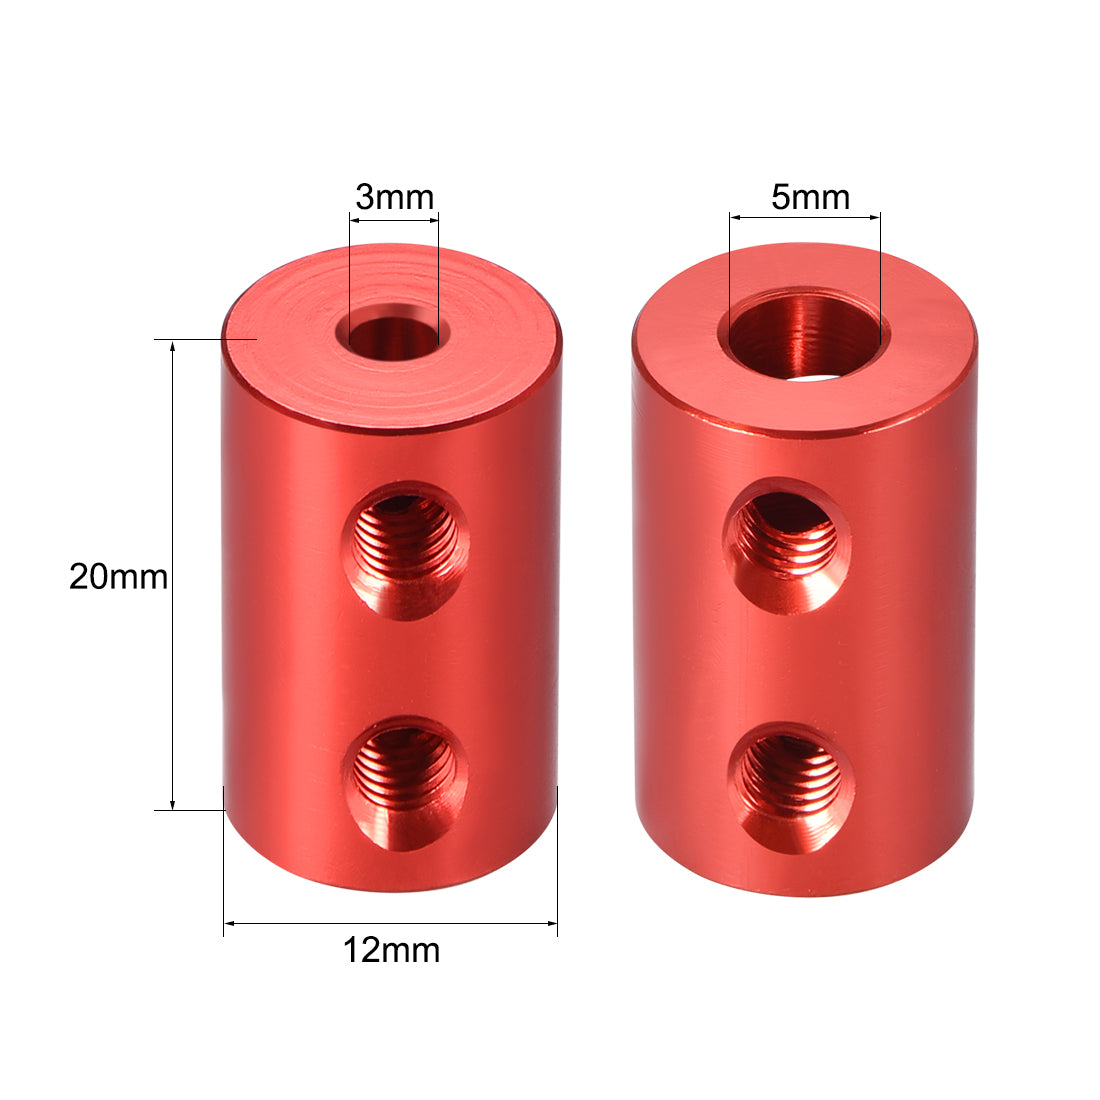 uxcell Uxcell Shaft Coupling 3mm to 5mm Bore L20xD12 Robot Motor Wheel Rigid Coupler Connector Red 2 Pcs